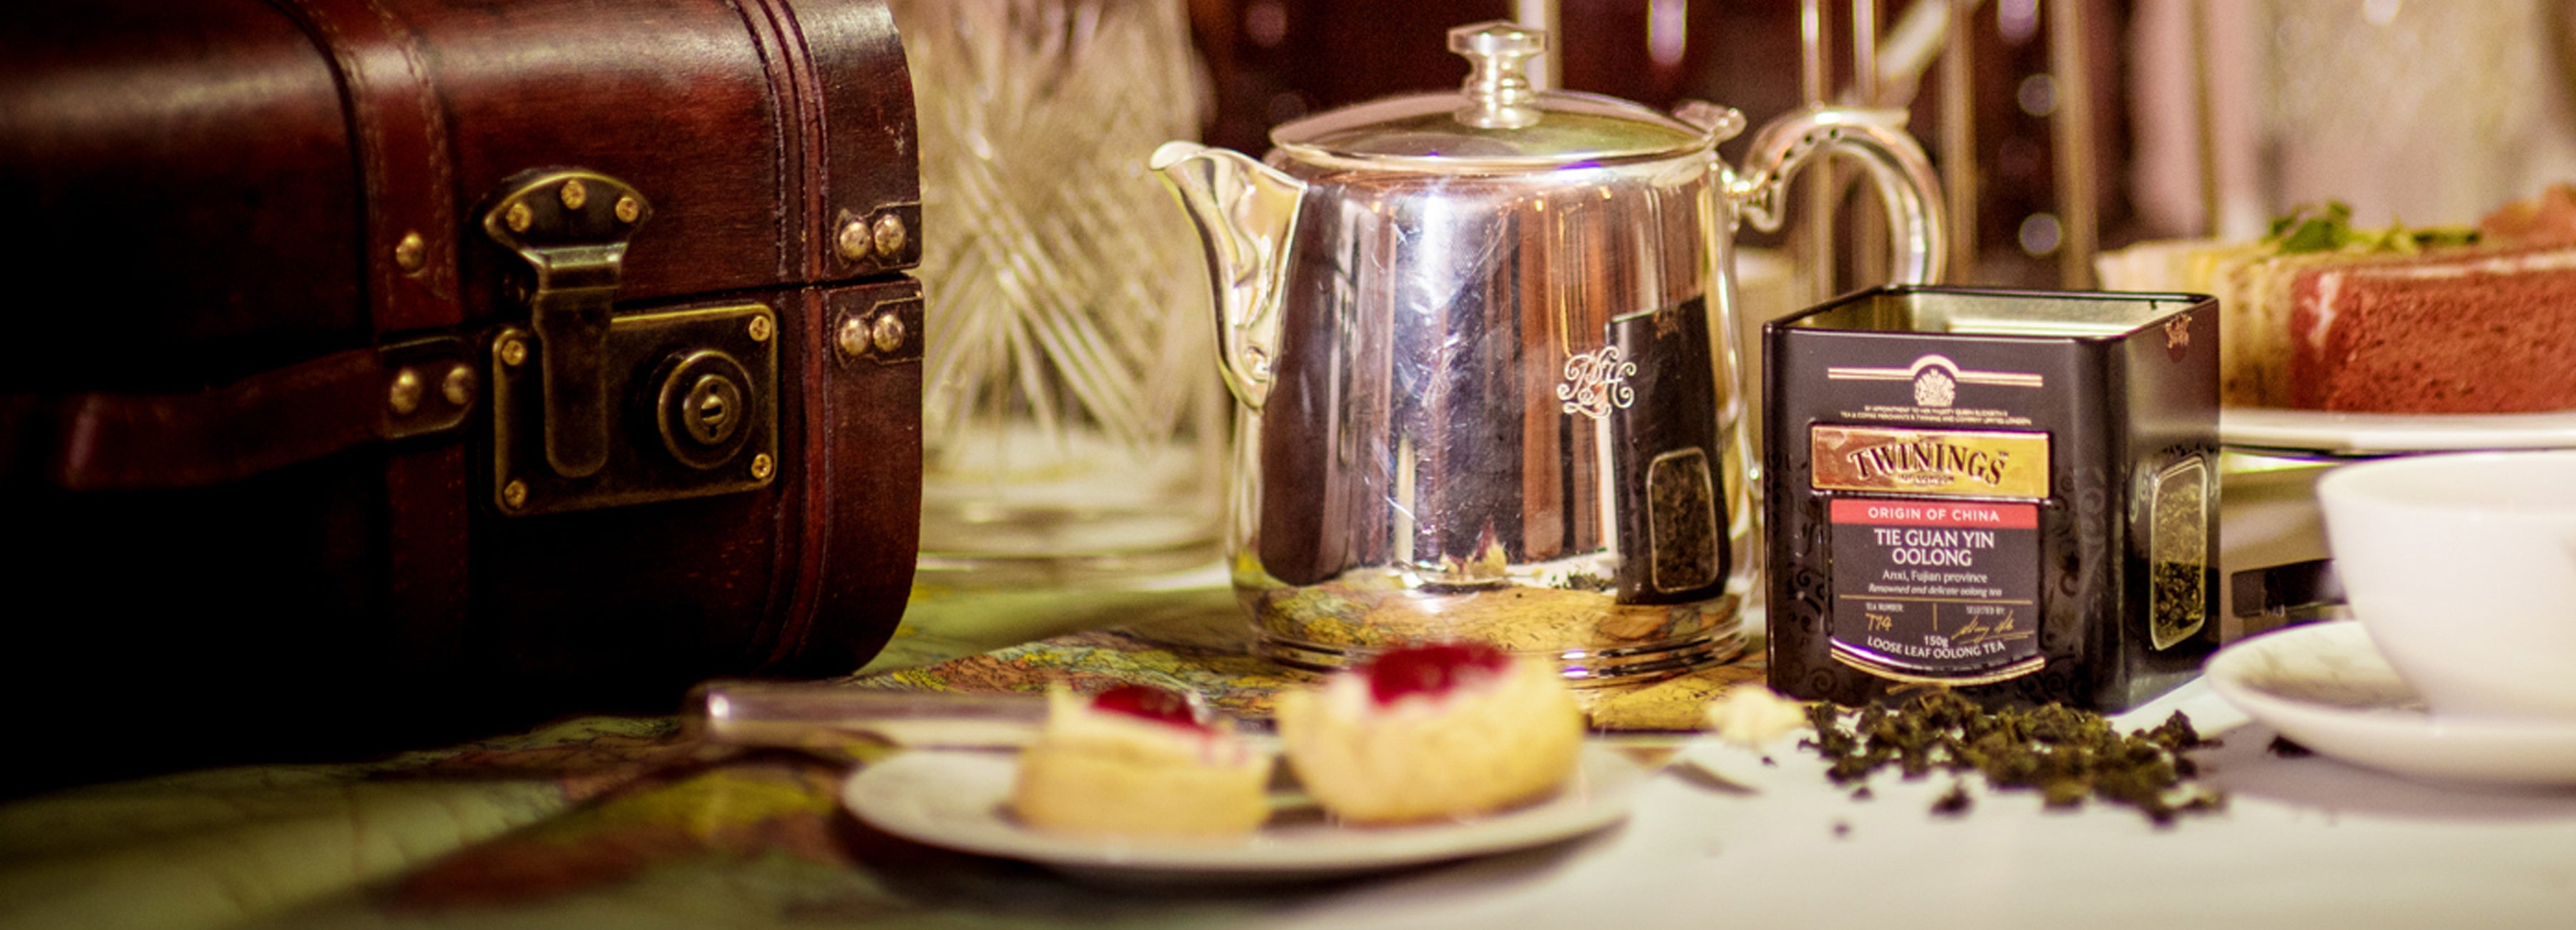 Twinings Afternoon Tea - The Palm Court